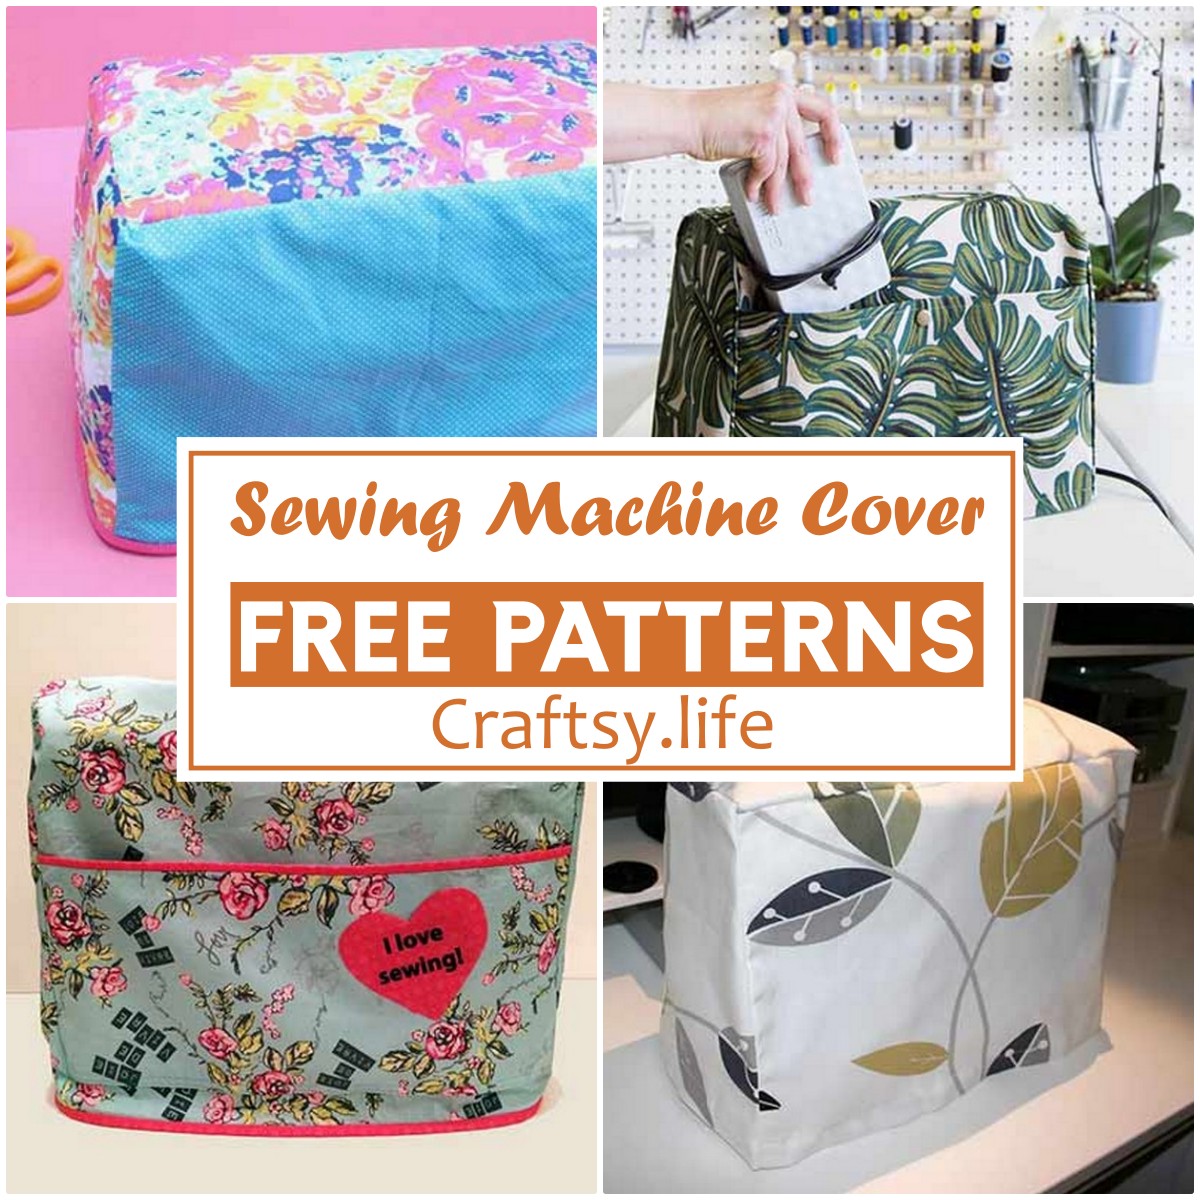 How to Make a DIY Sewing Machine Cover - Free Pattern!